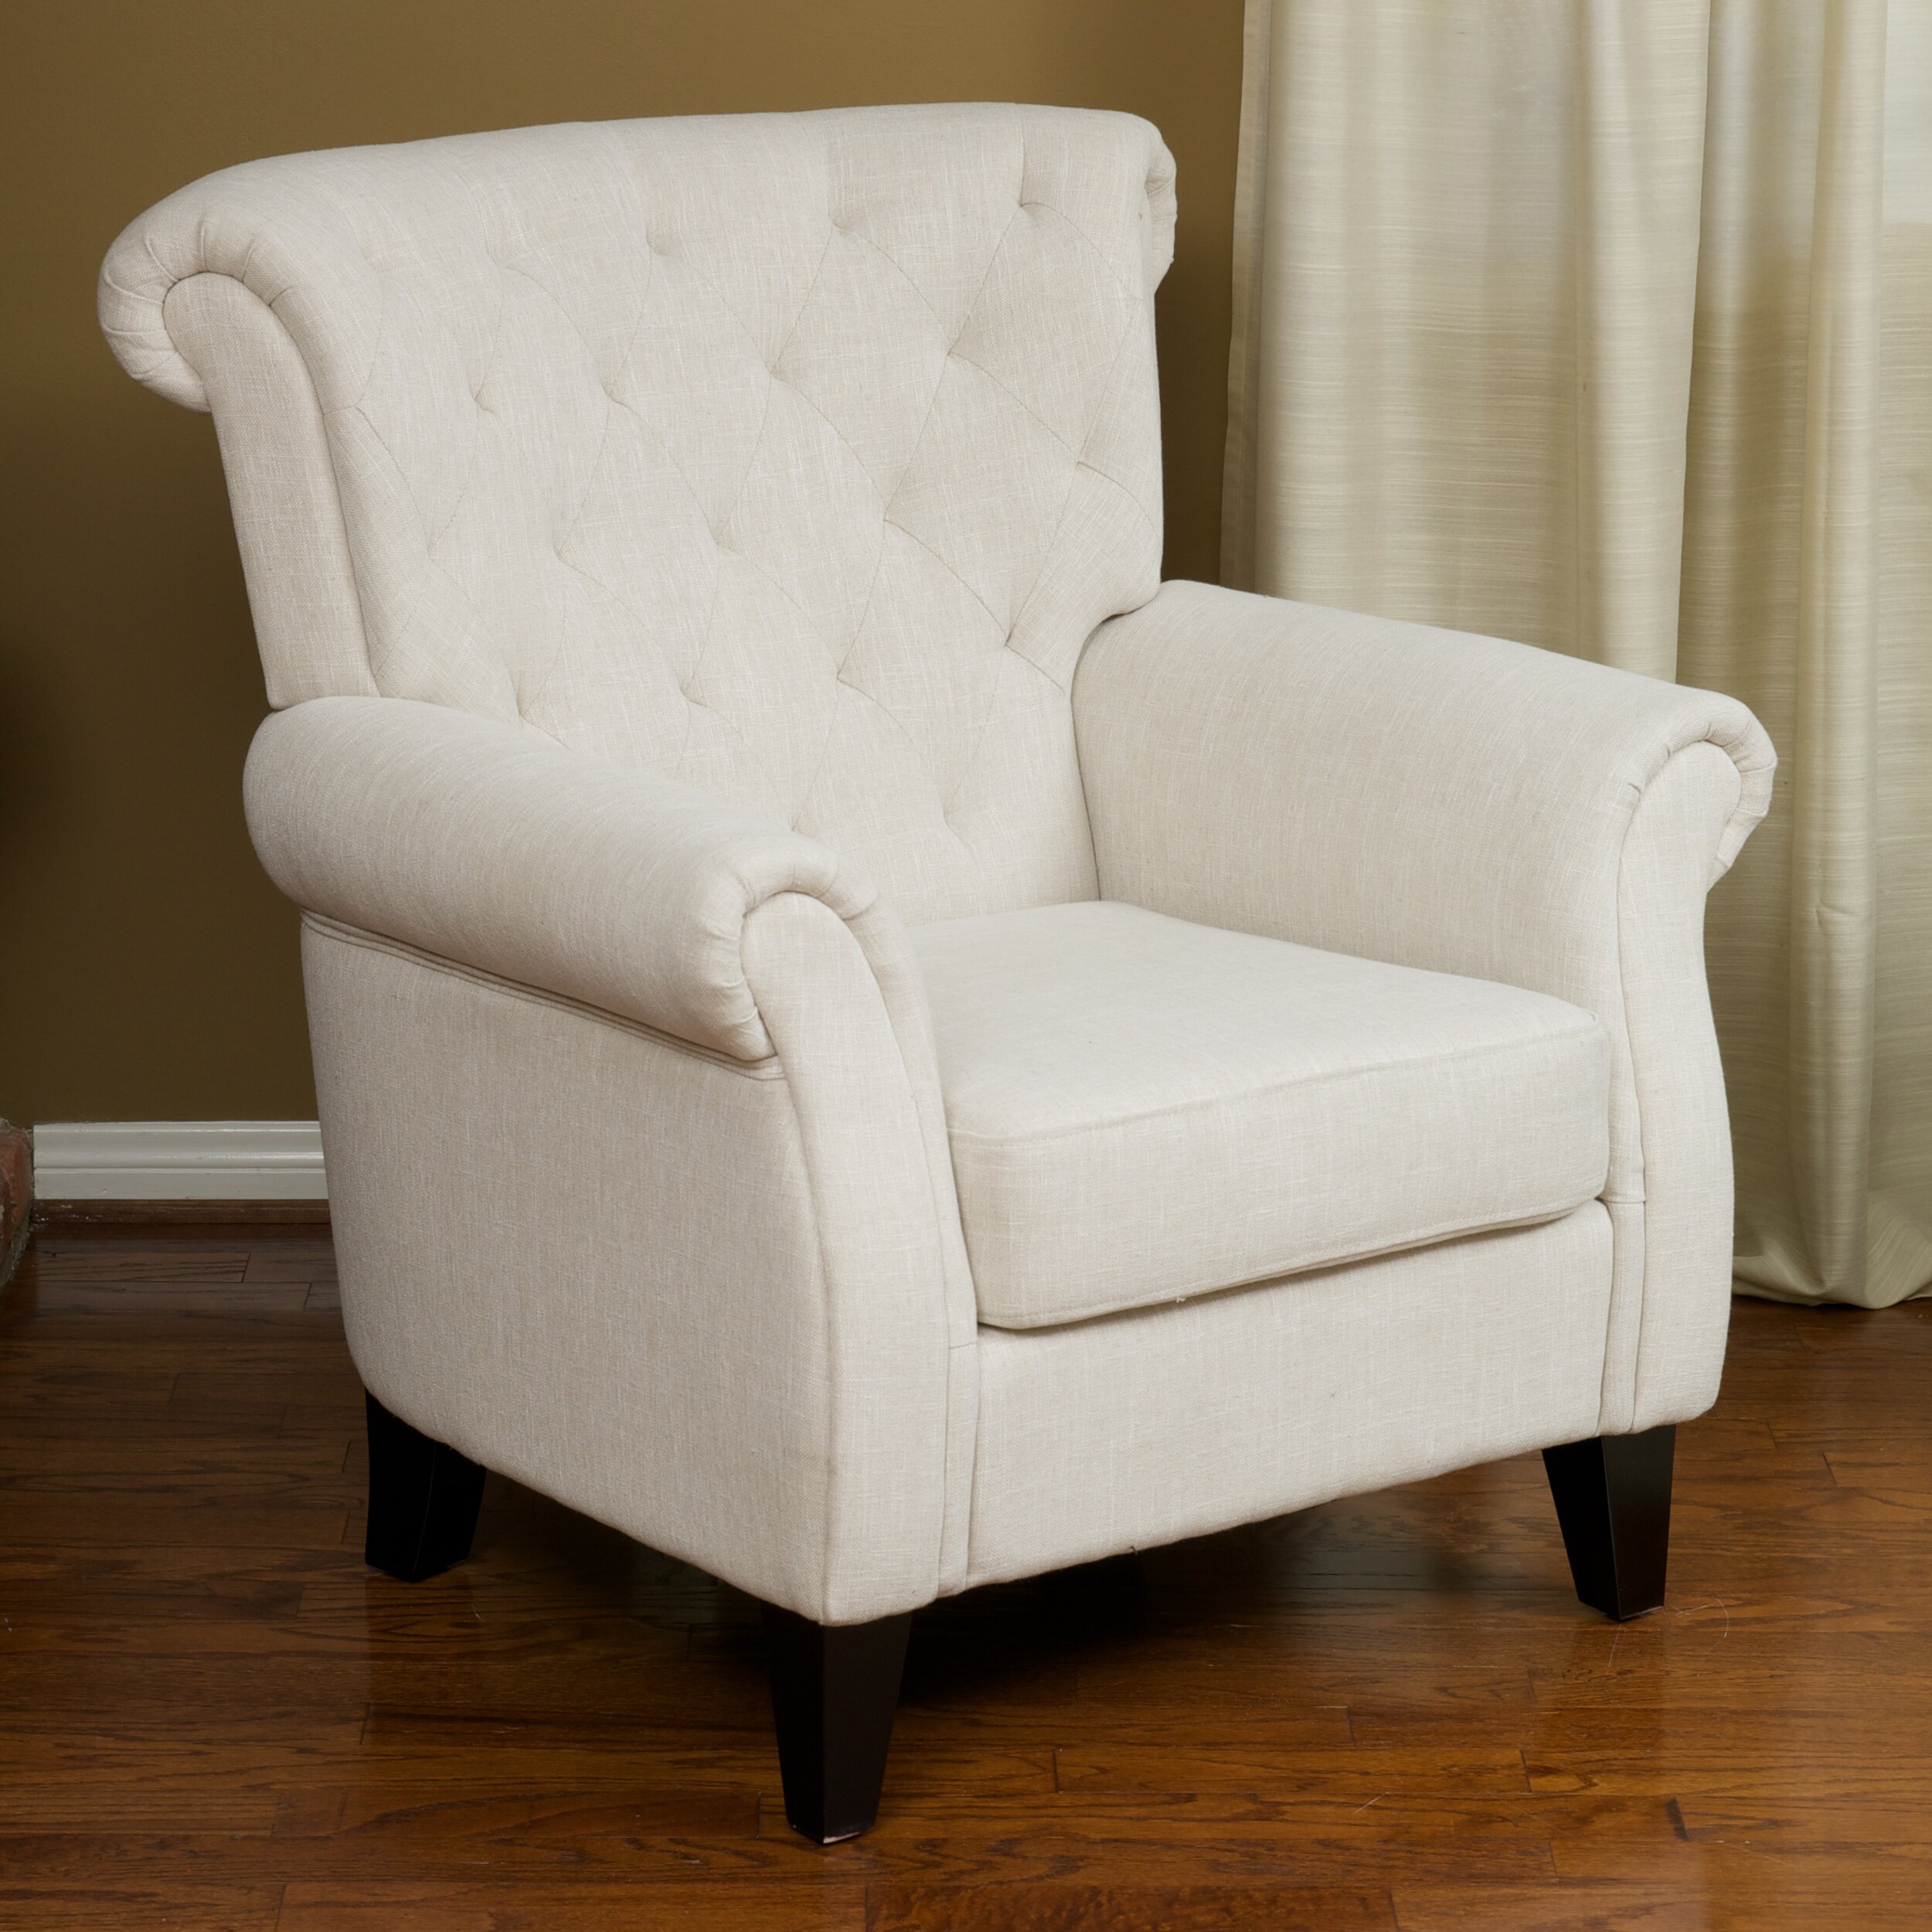 Alcott Hill Jaymee Tufted Upholstered Arm Chair  Reviews 